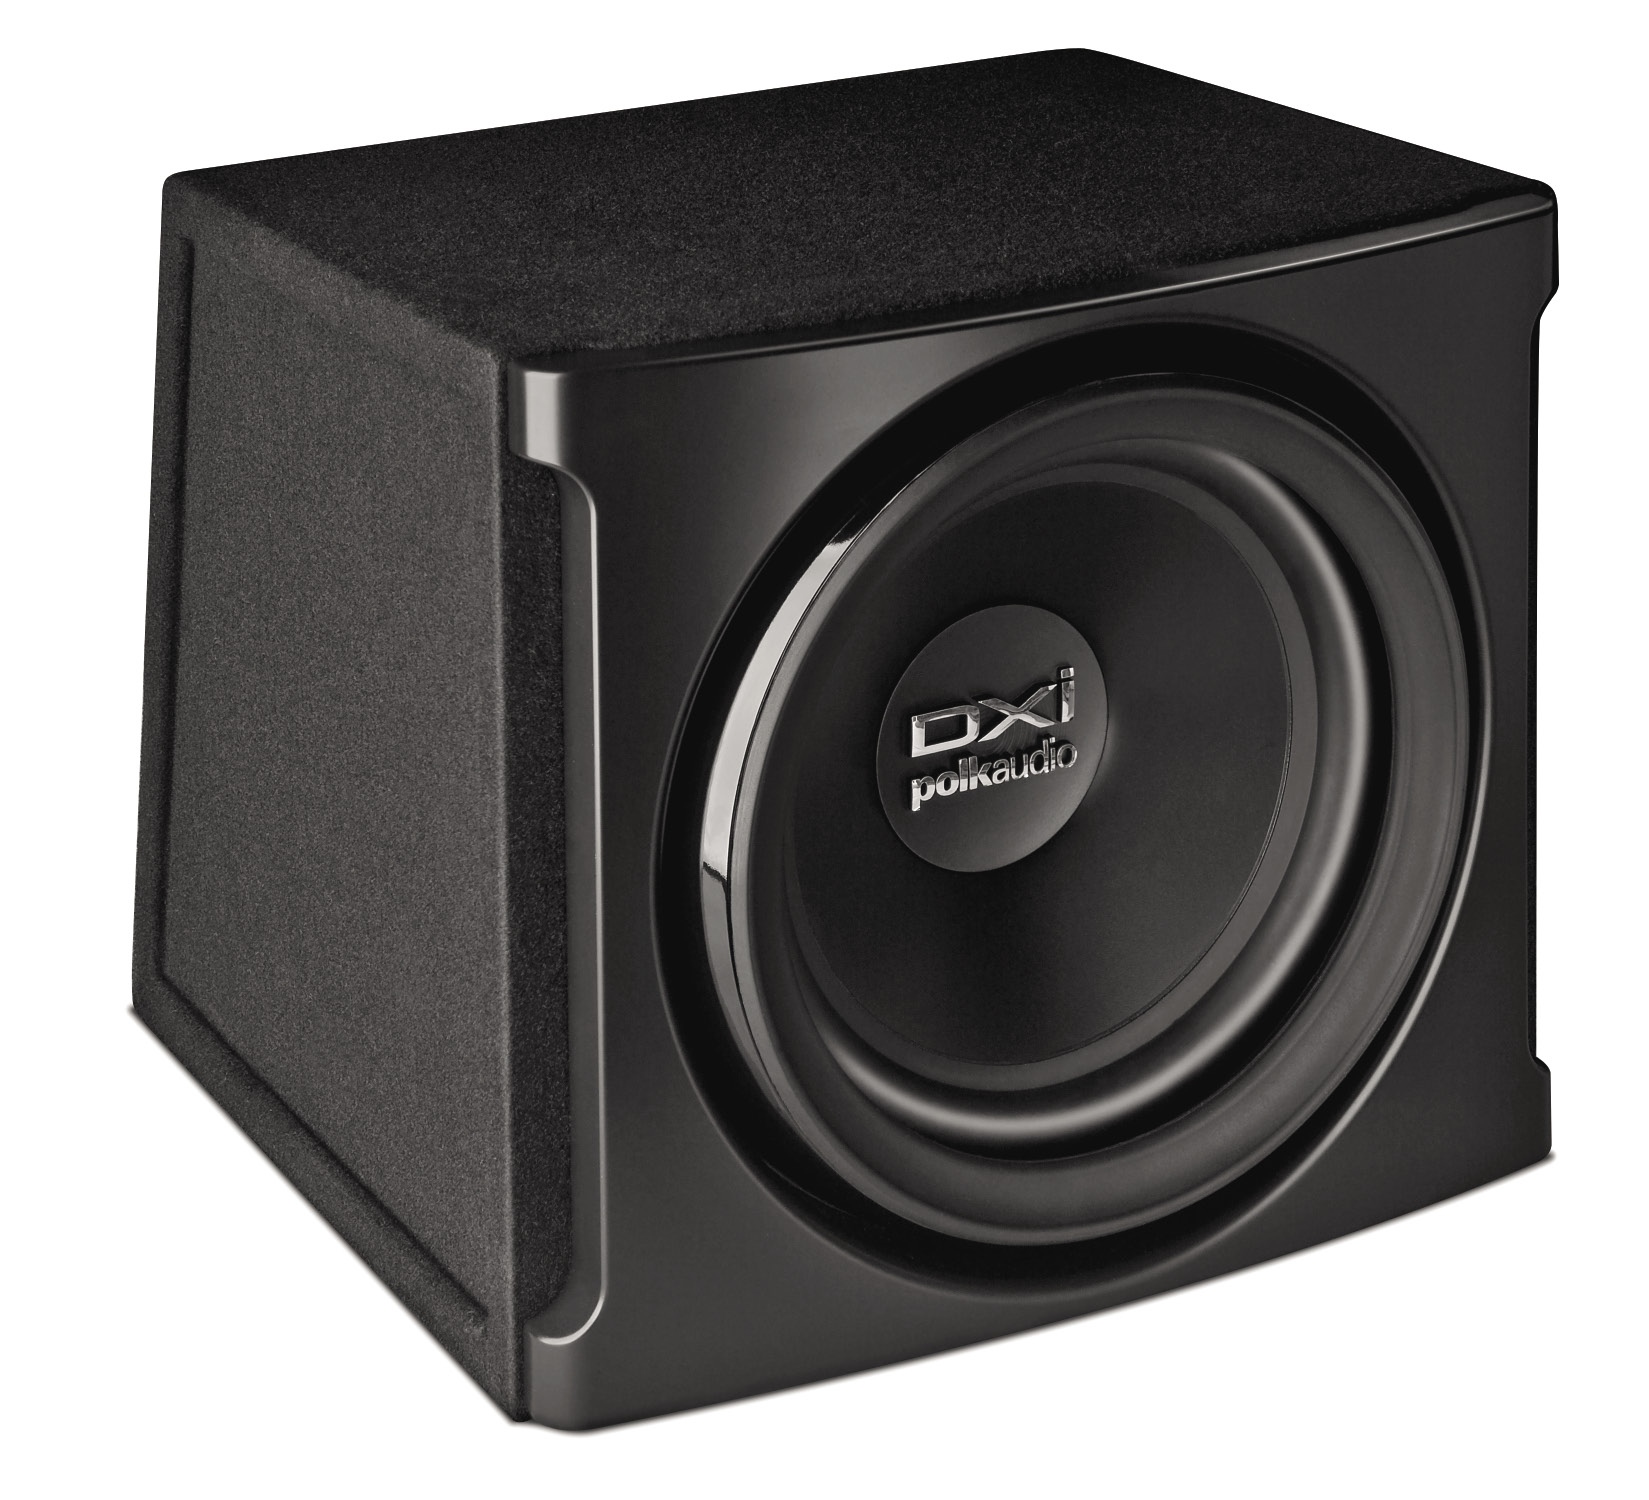 Polk Audio DXi 108 Subwoofer System Review 